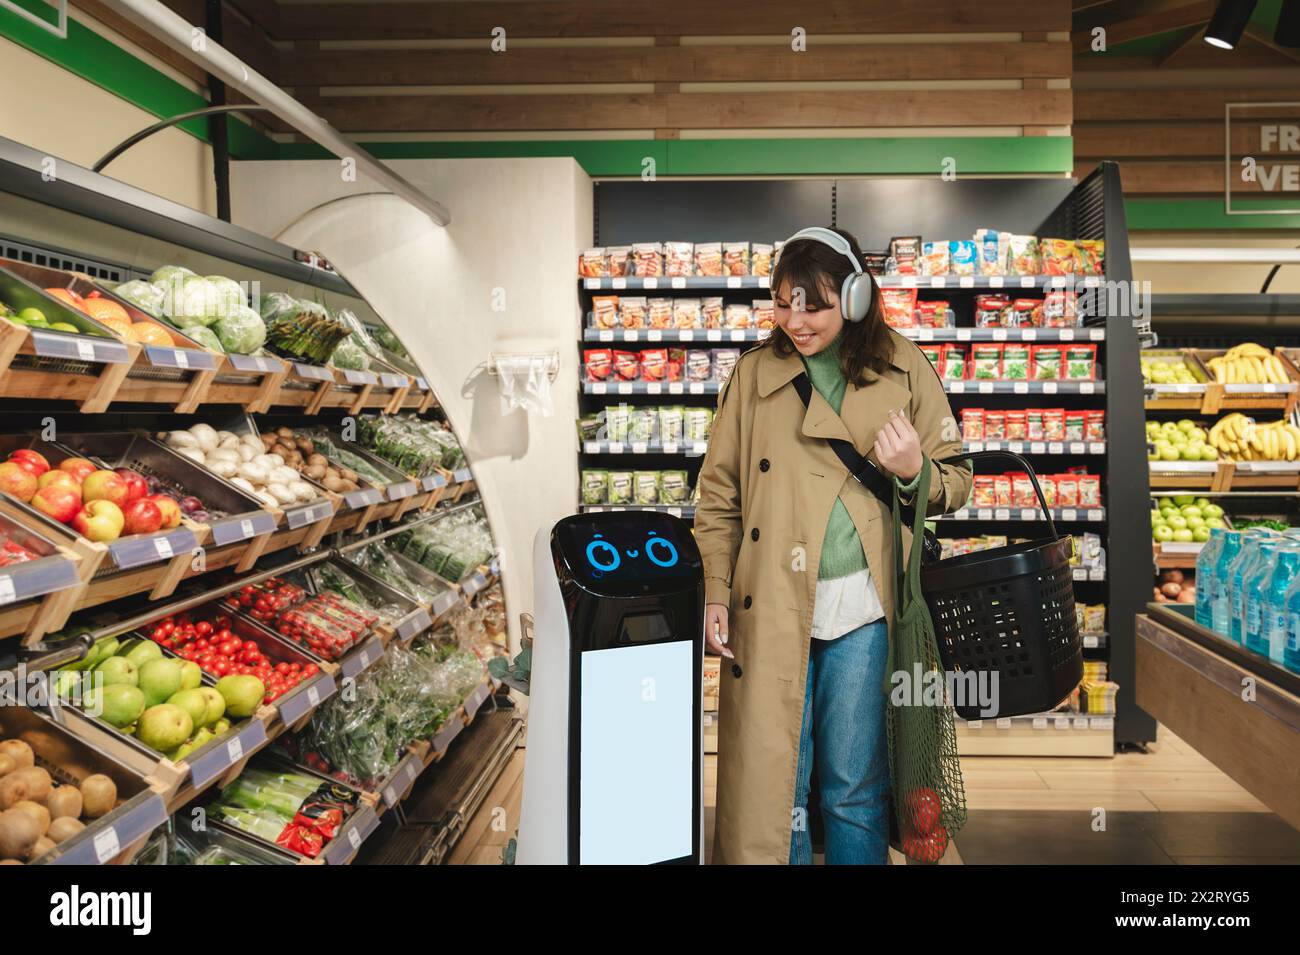 Smiling woman walking with smart robot assistant at grocery store Stock Photo